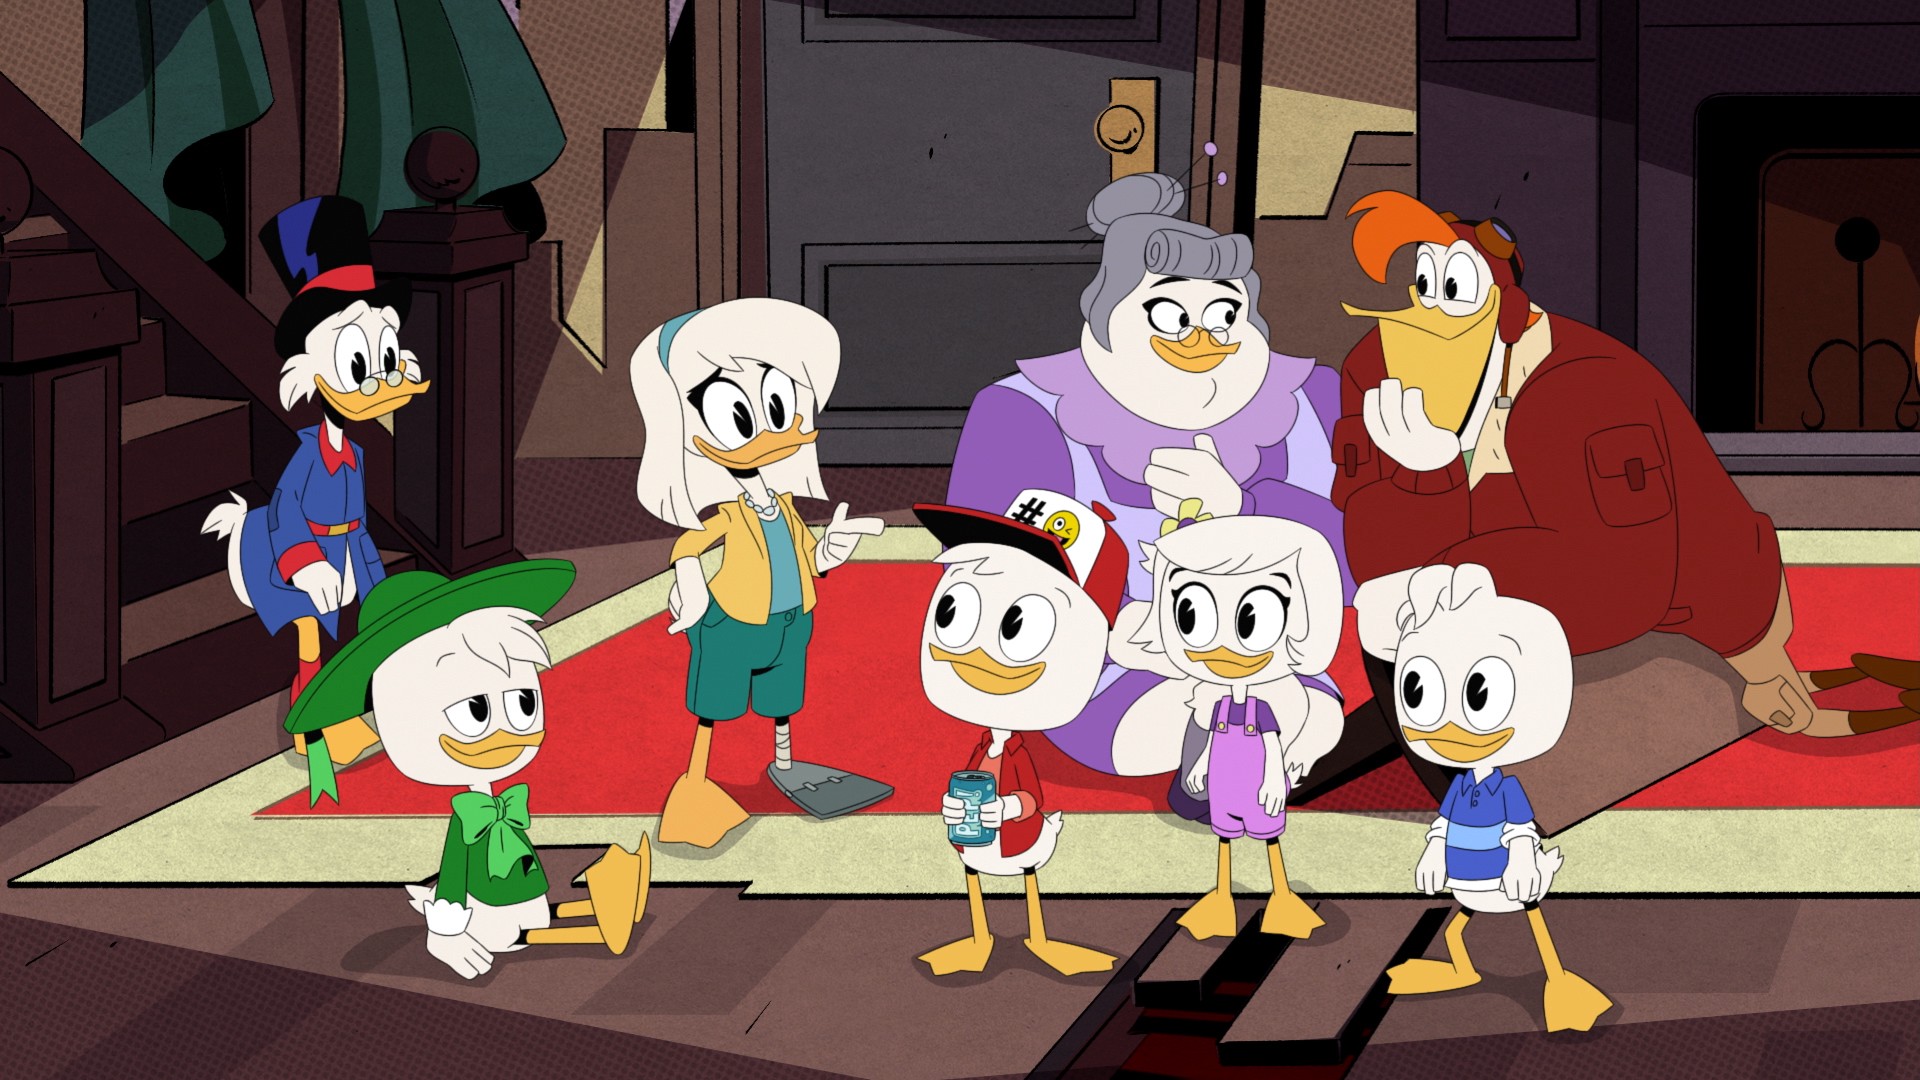 DuckTales S03 E06: What’s In Store?